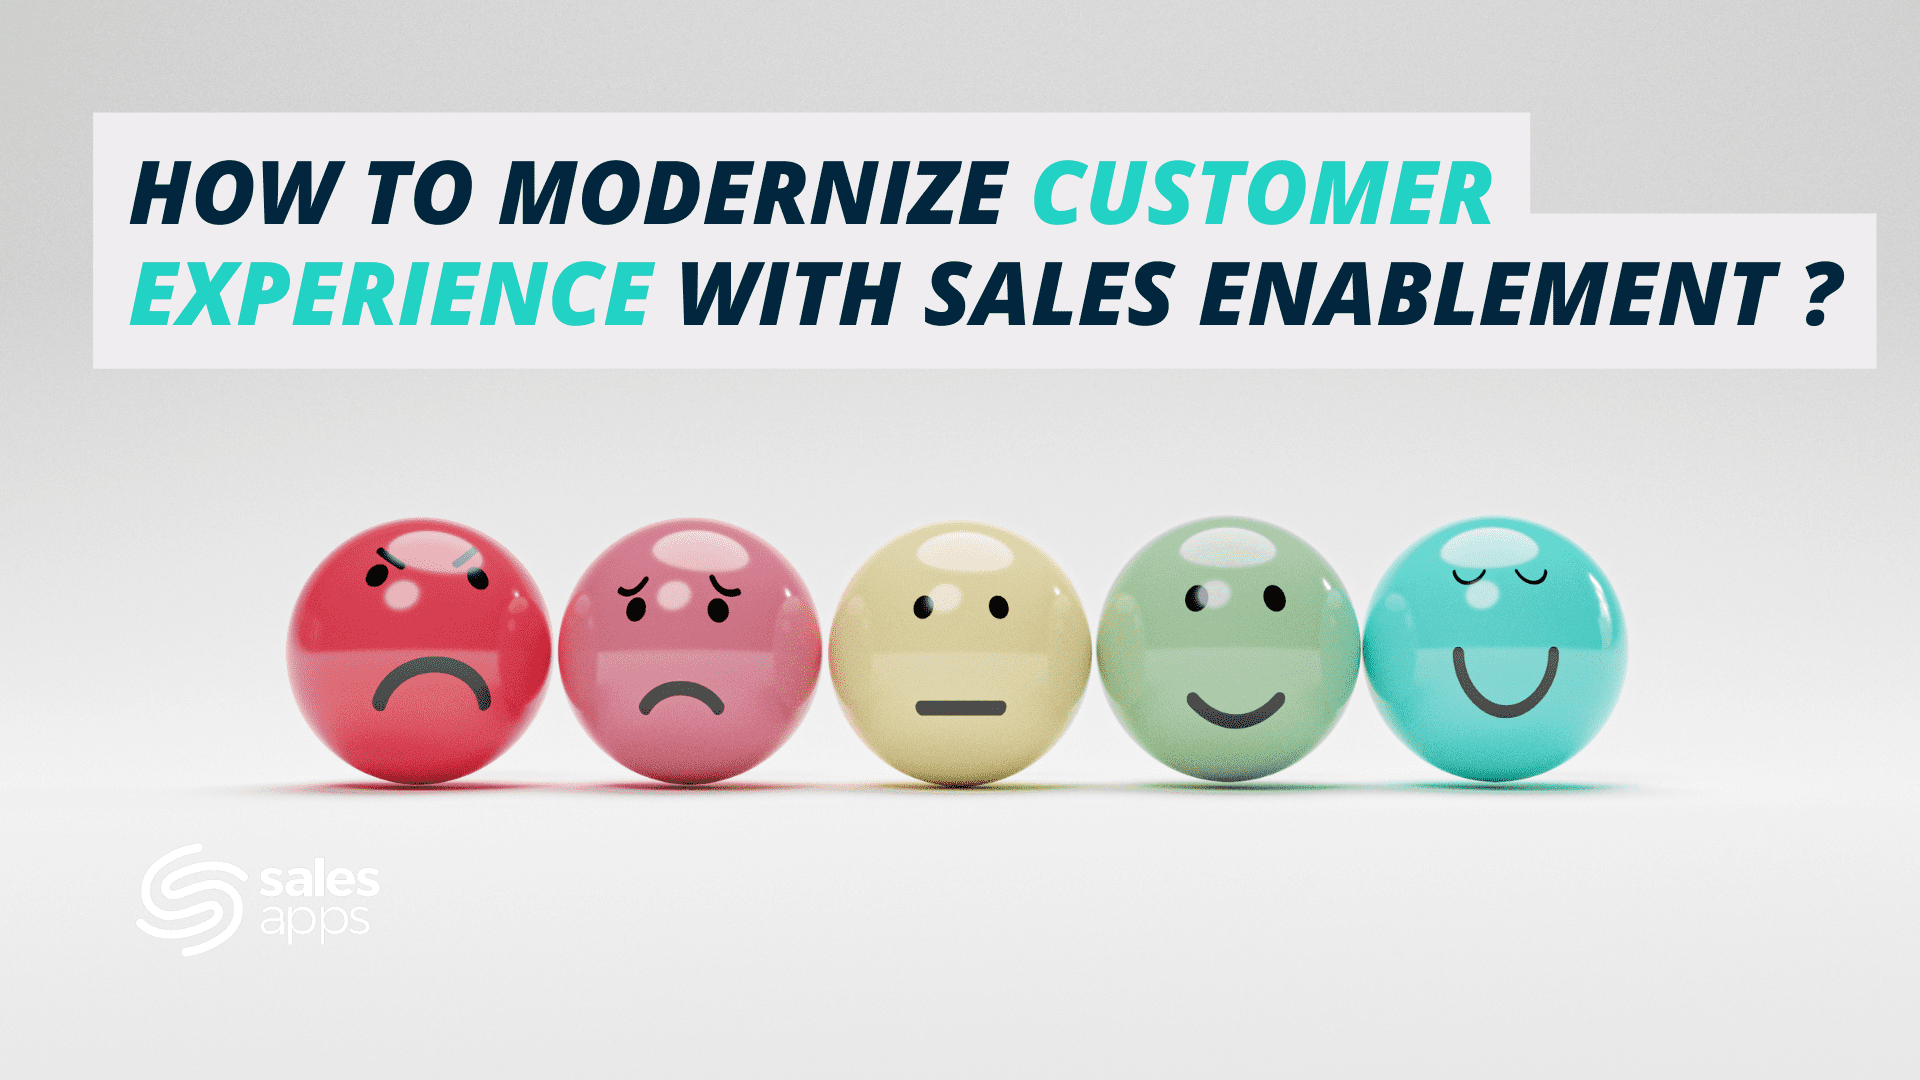 How to modernize the customer appointment experience with Sales Enablement